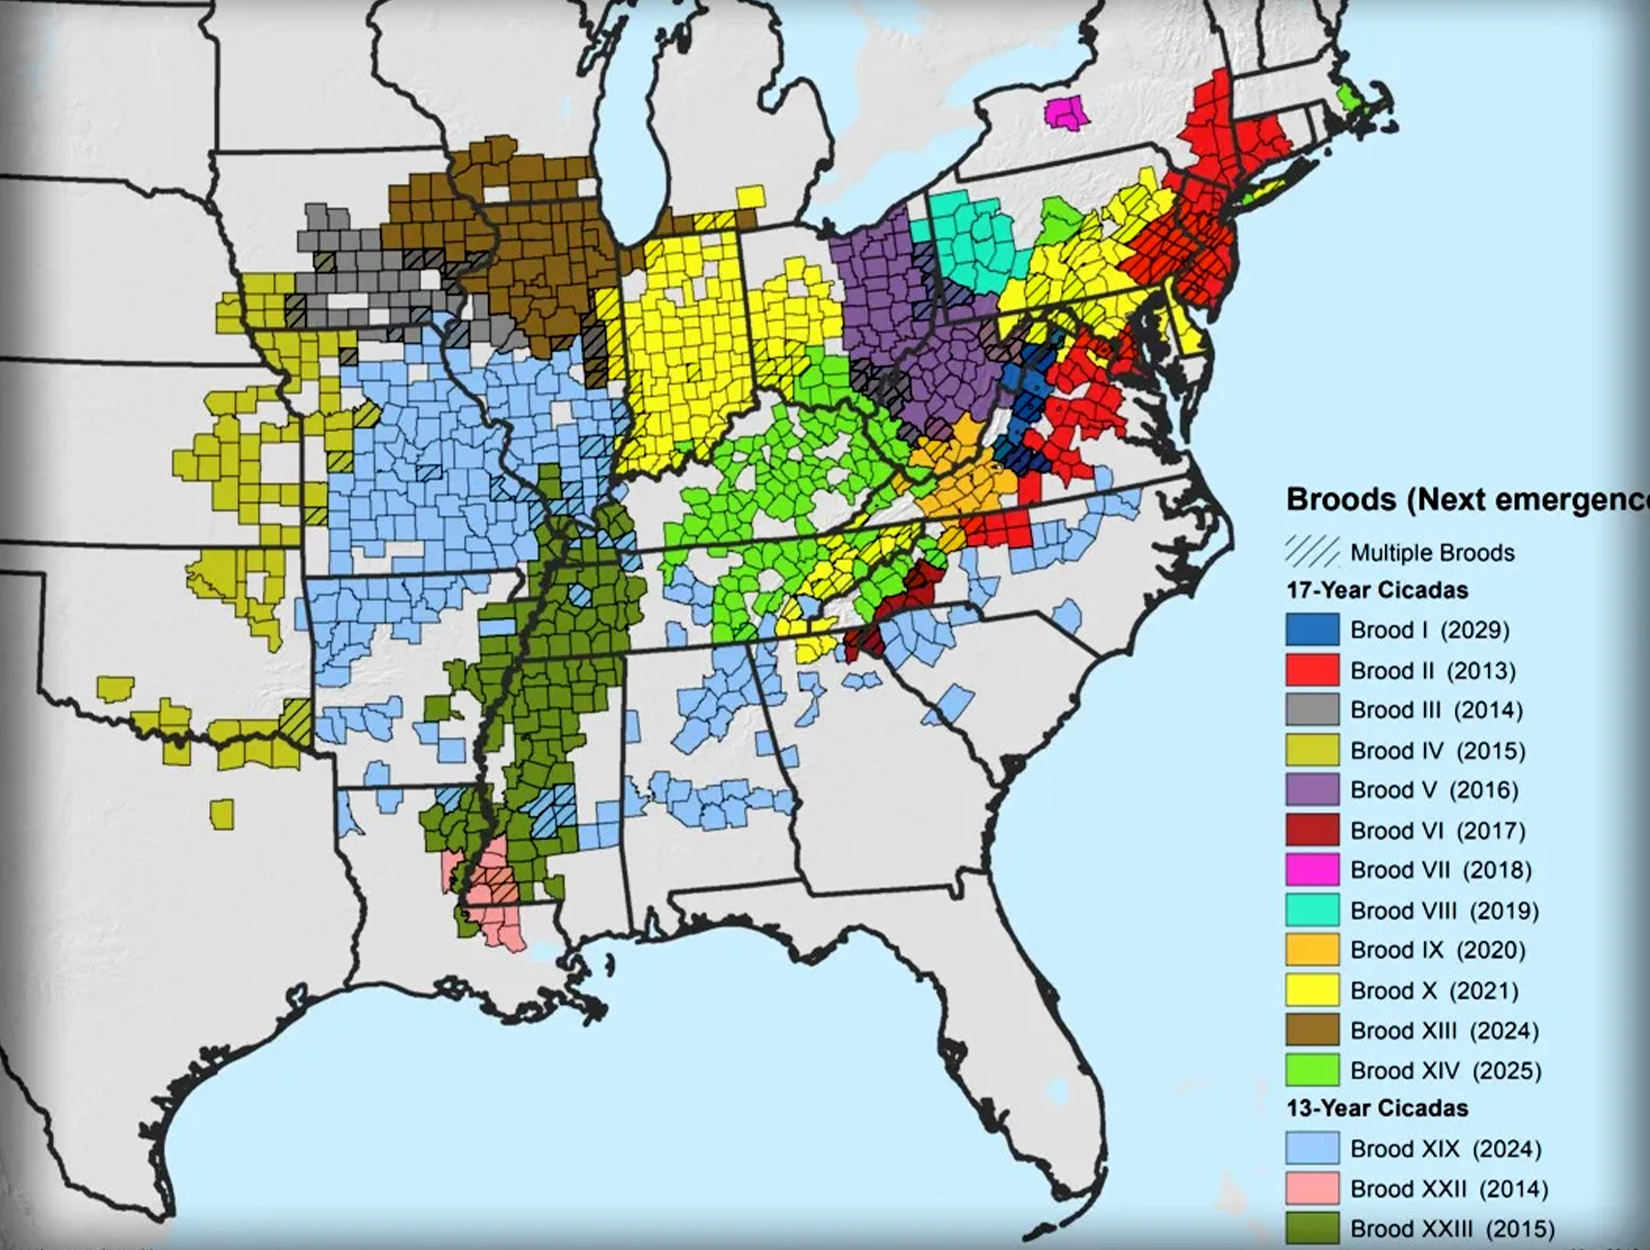 A map showing the periodical cicada broods in the U.S.